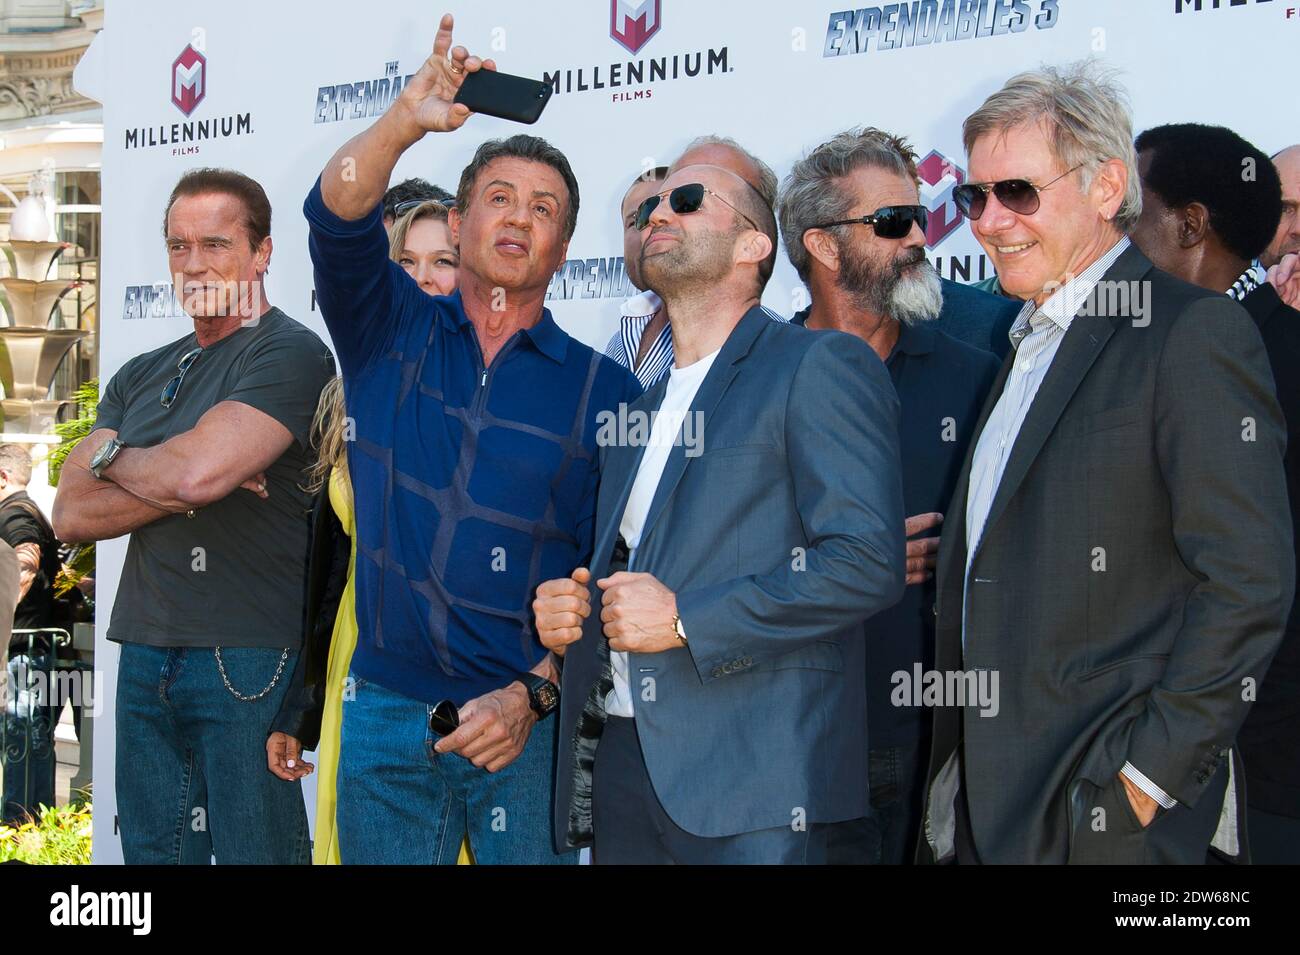 The cast including Director Patrick Hughes, Sylvester Stallone, Jason Statham, Harrison Ford, Wesley Snipes, Dolph Lundgren, Glen Powell, Randy Couture, Antonio Banderas, Arnold Schwarzenegger, Kellan Lutz and Natalie Burn arriving at the photocall of the film Expendables 3 as part of the 67th Cannes International Film Festival in Cannes, southern France on May 18, 2014. Photo by Nicolas Genin/ABACAPRESS.COM Stock Photo